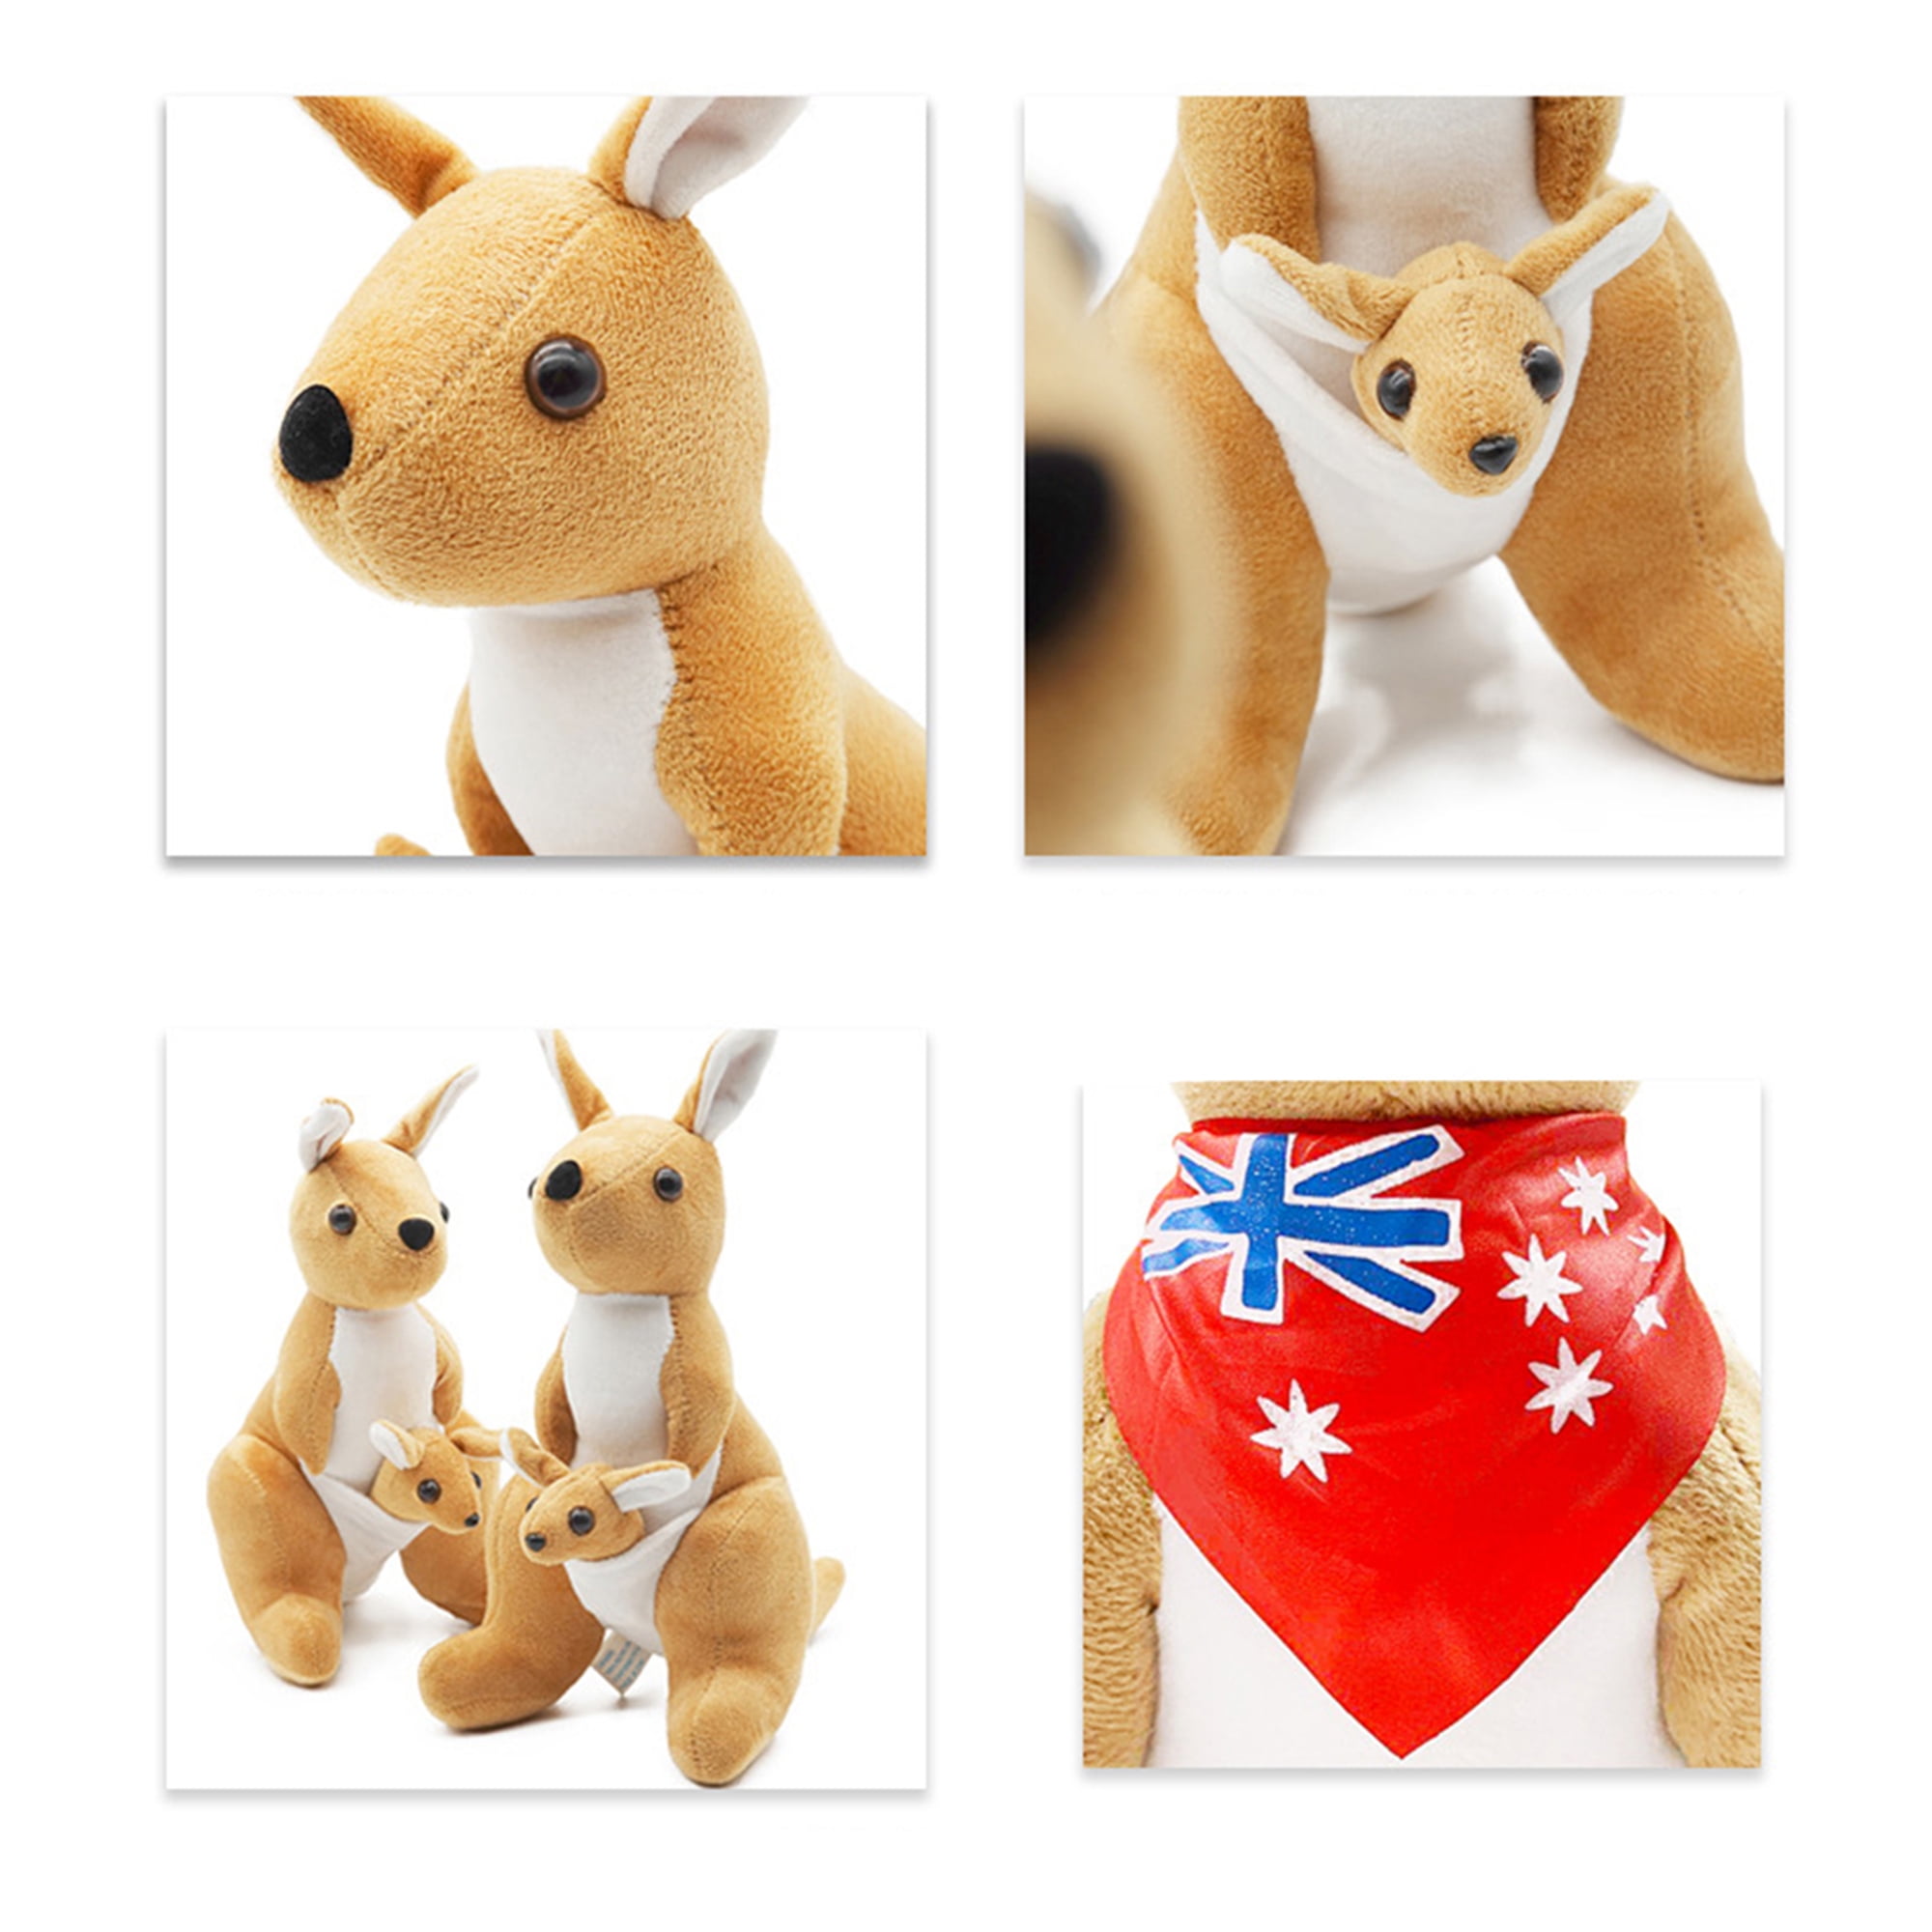 Squishable Cuddly Kangaroo with the Baby Approx New . 9 inch 